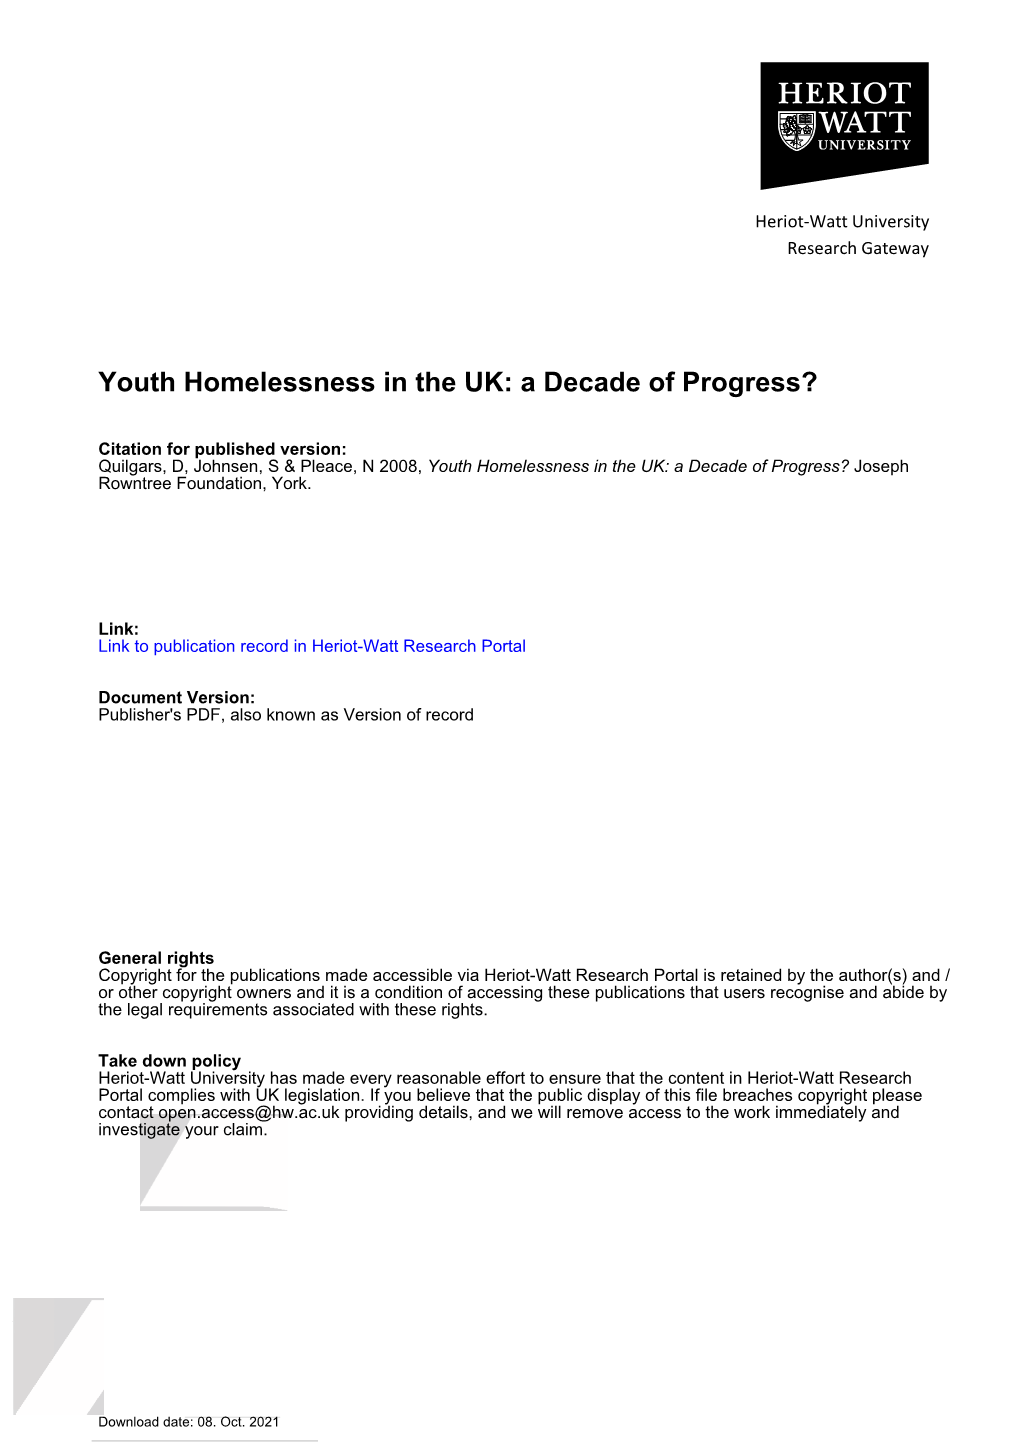 Youth Homelessness in the UK: a Decade of Progress?